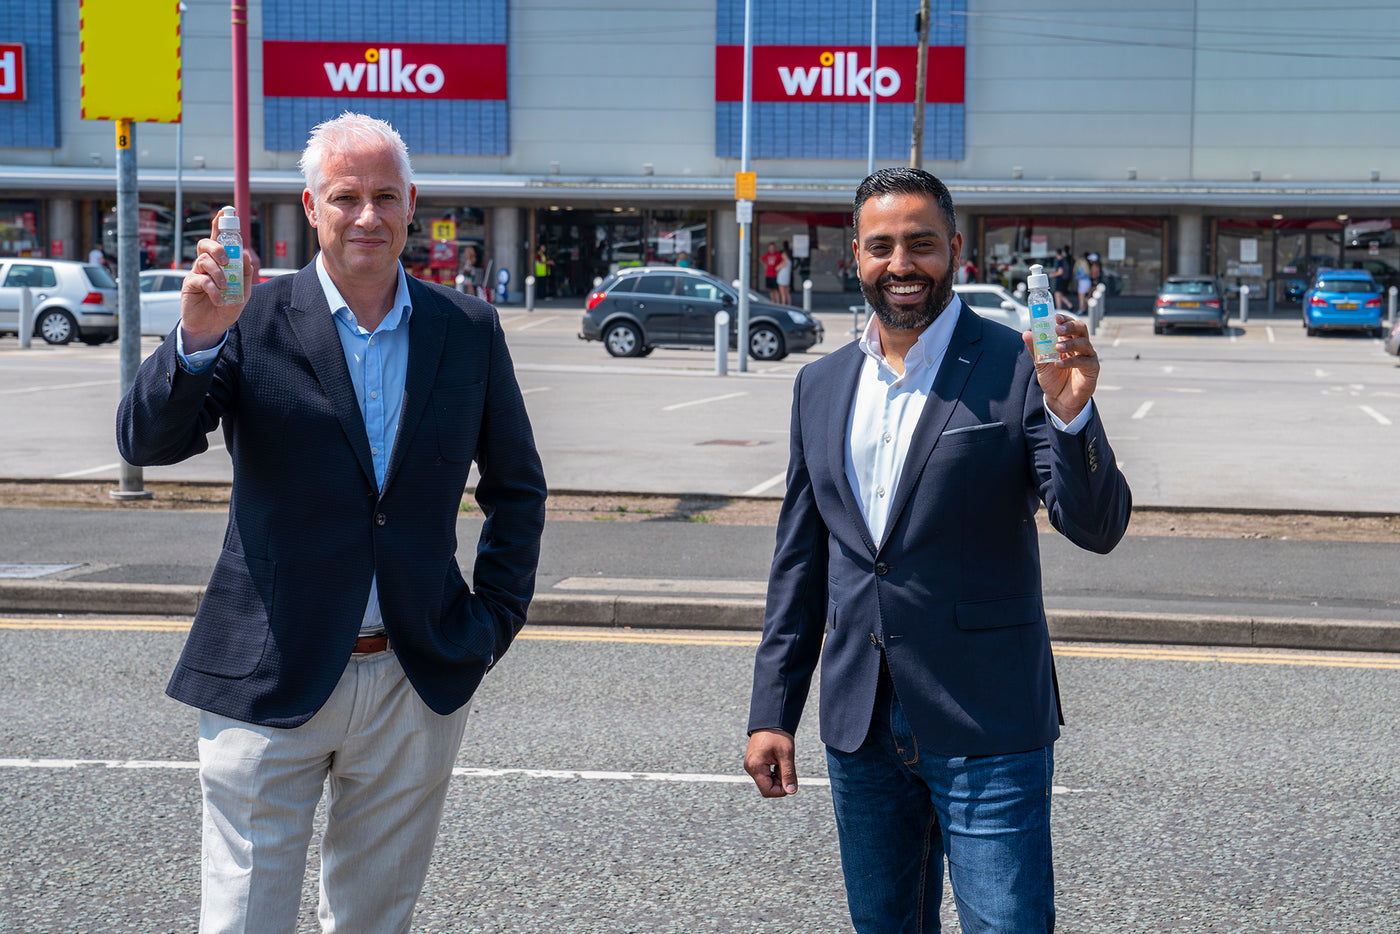 NEW UK PPE BRAND SANDITIZE, LAUNCHES  WITH WILKO TO PUT 1 MILLION BOTTLES IN HANDS OF CONSUMERS